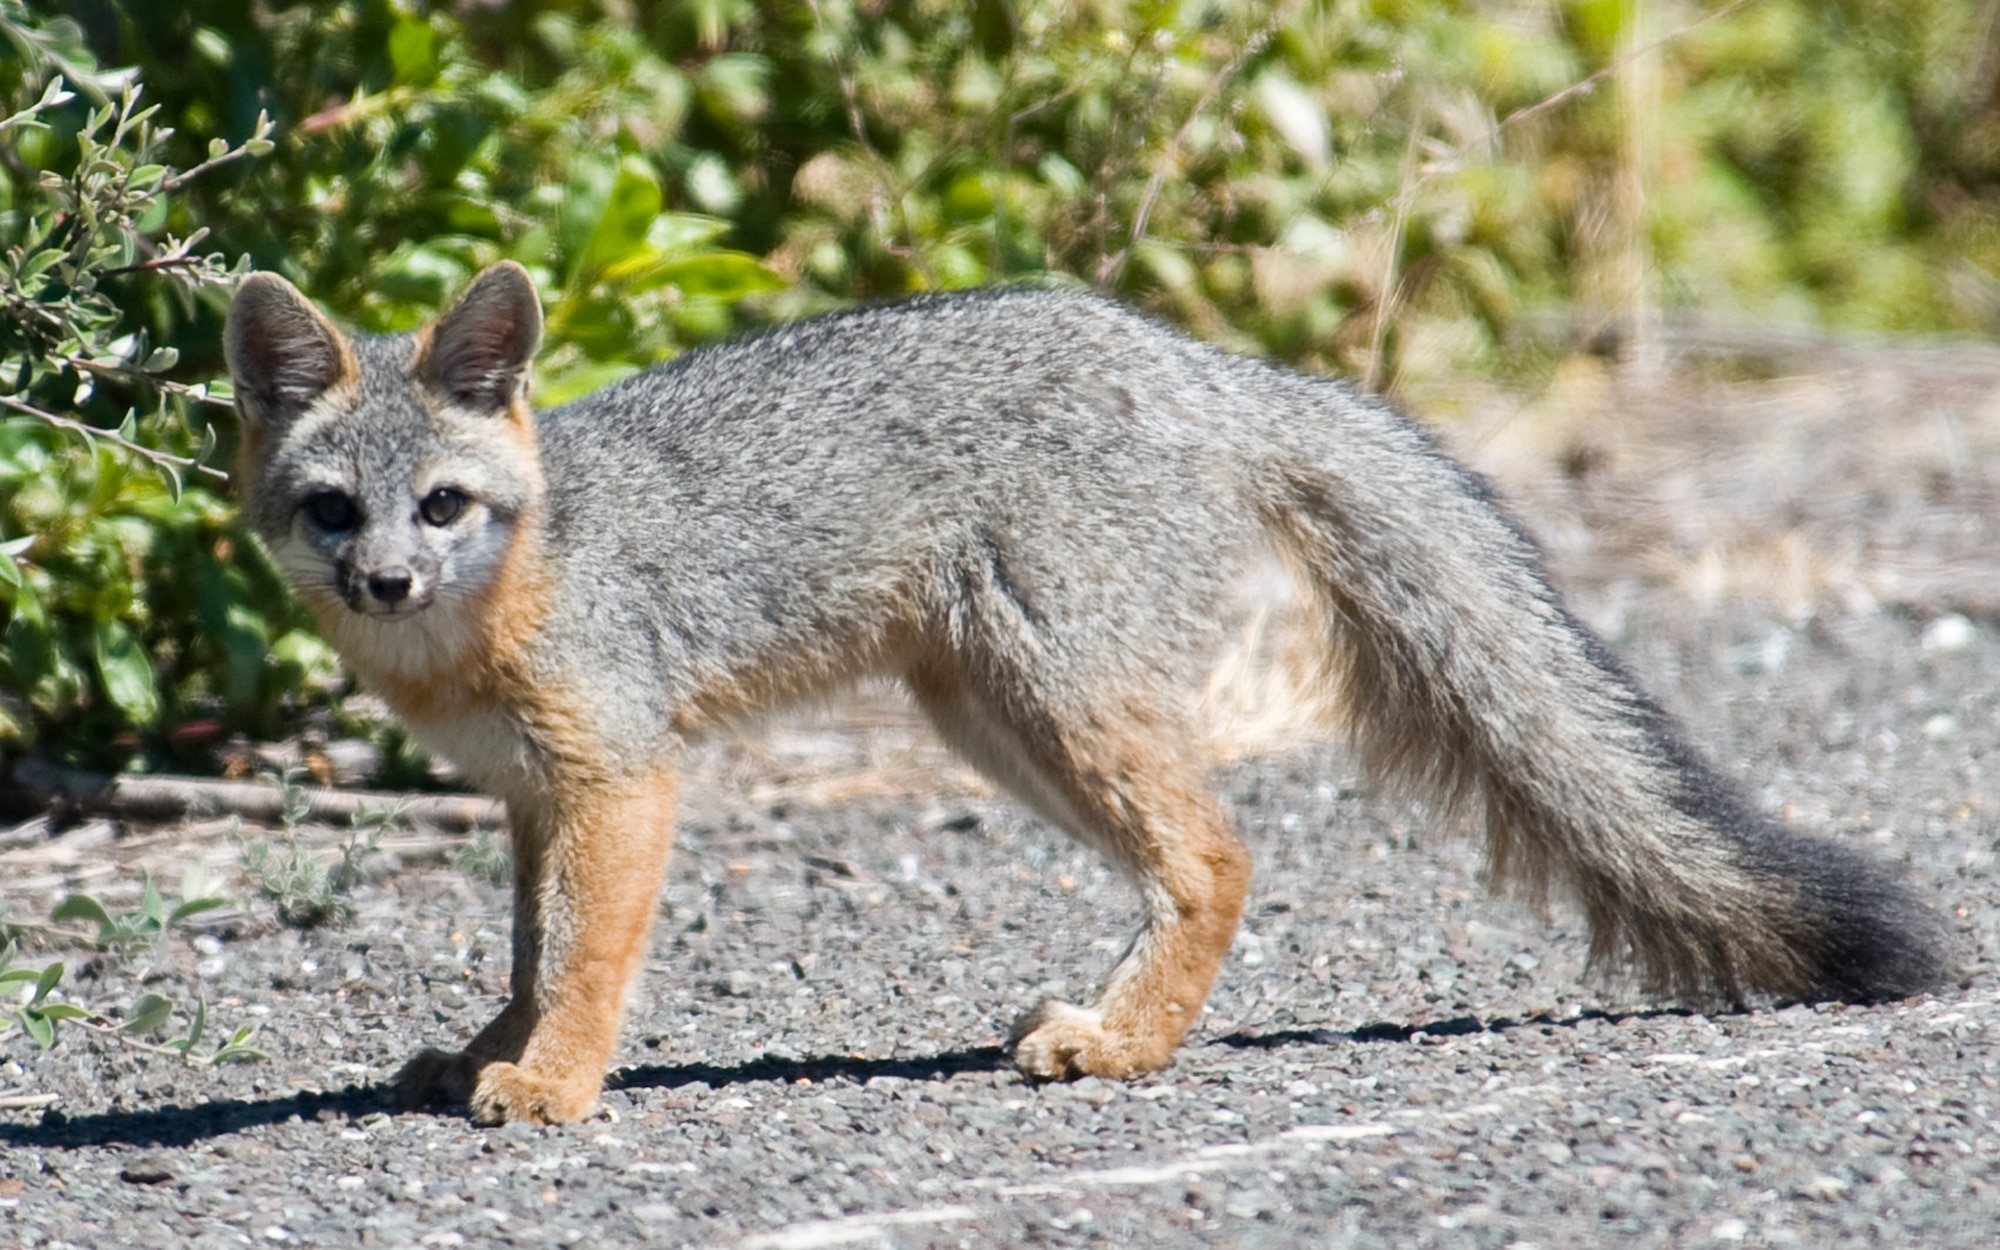 A grey fox hunts for small prey, August 14, 2011, Travis Air Force Base Calif.  Several acers of pristine federally protected land located on Travis provide an ideal environment for many species of flora and fauna. (U.S. Air Force Photo by Heide Couch)